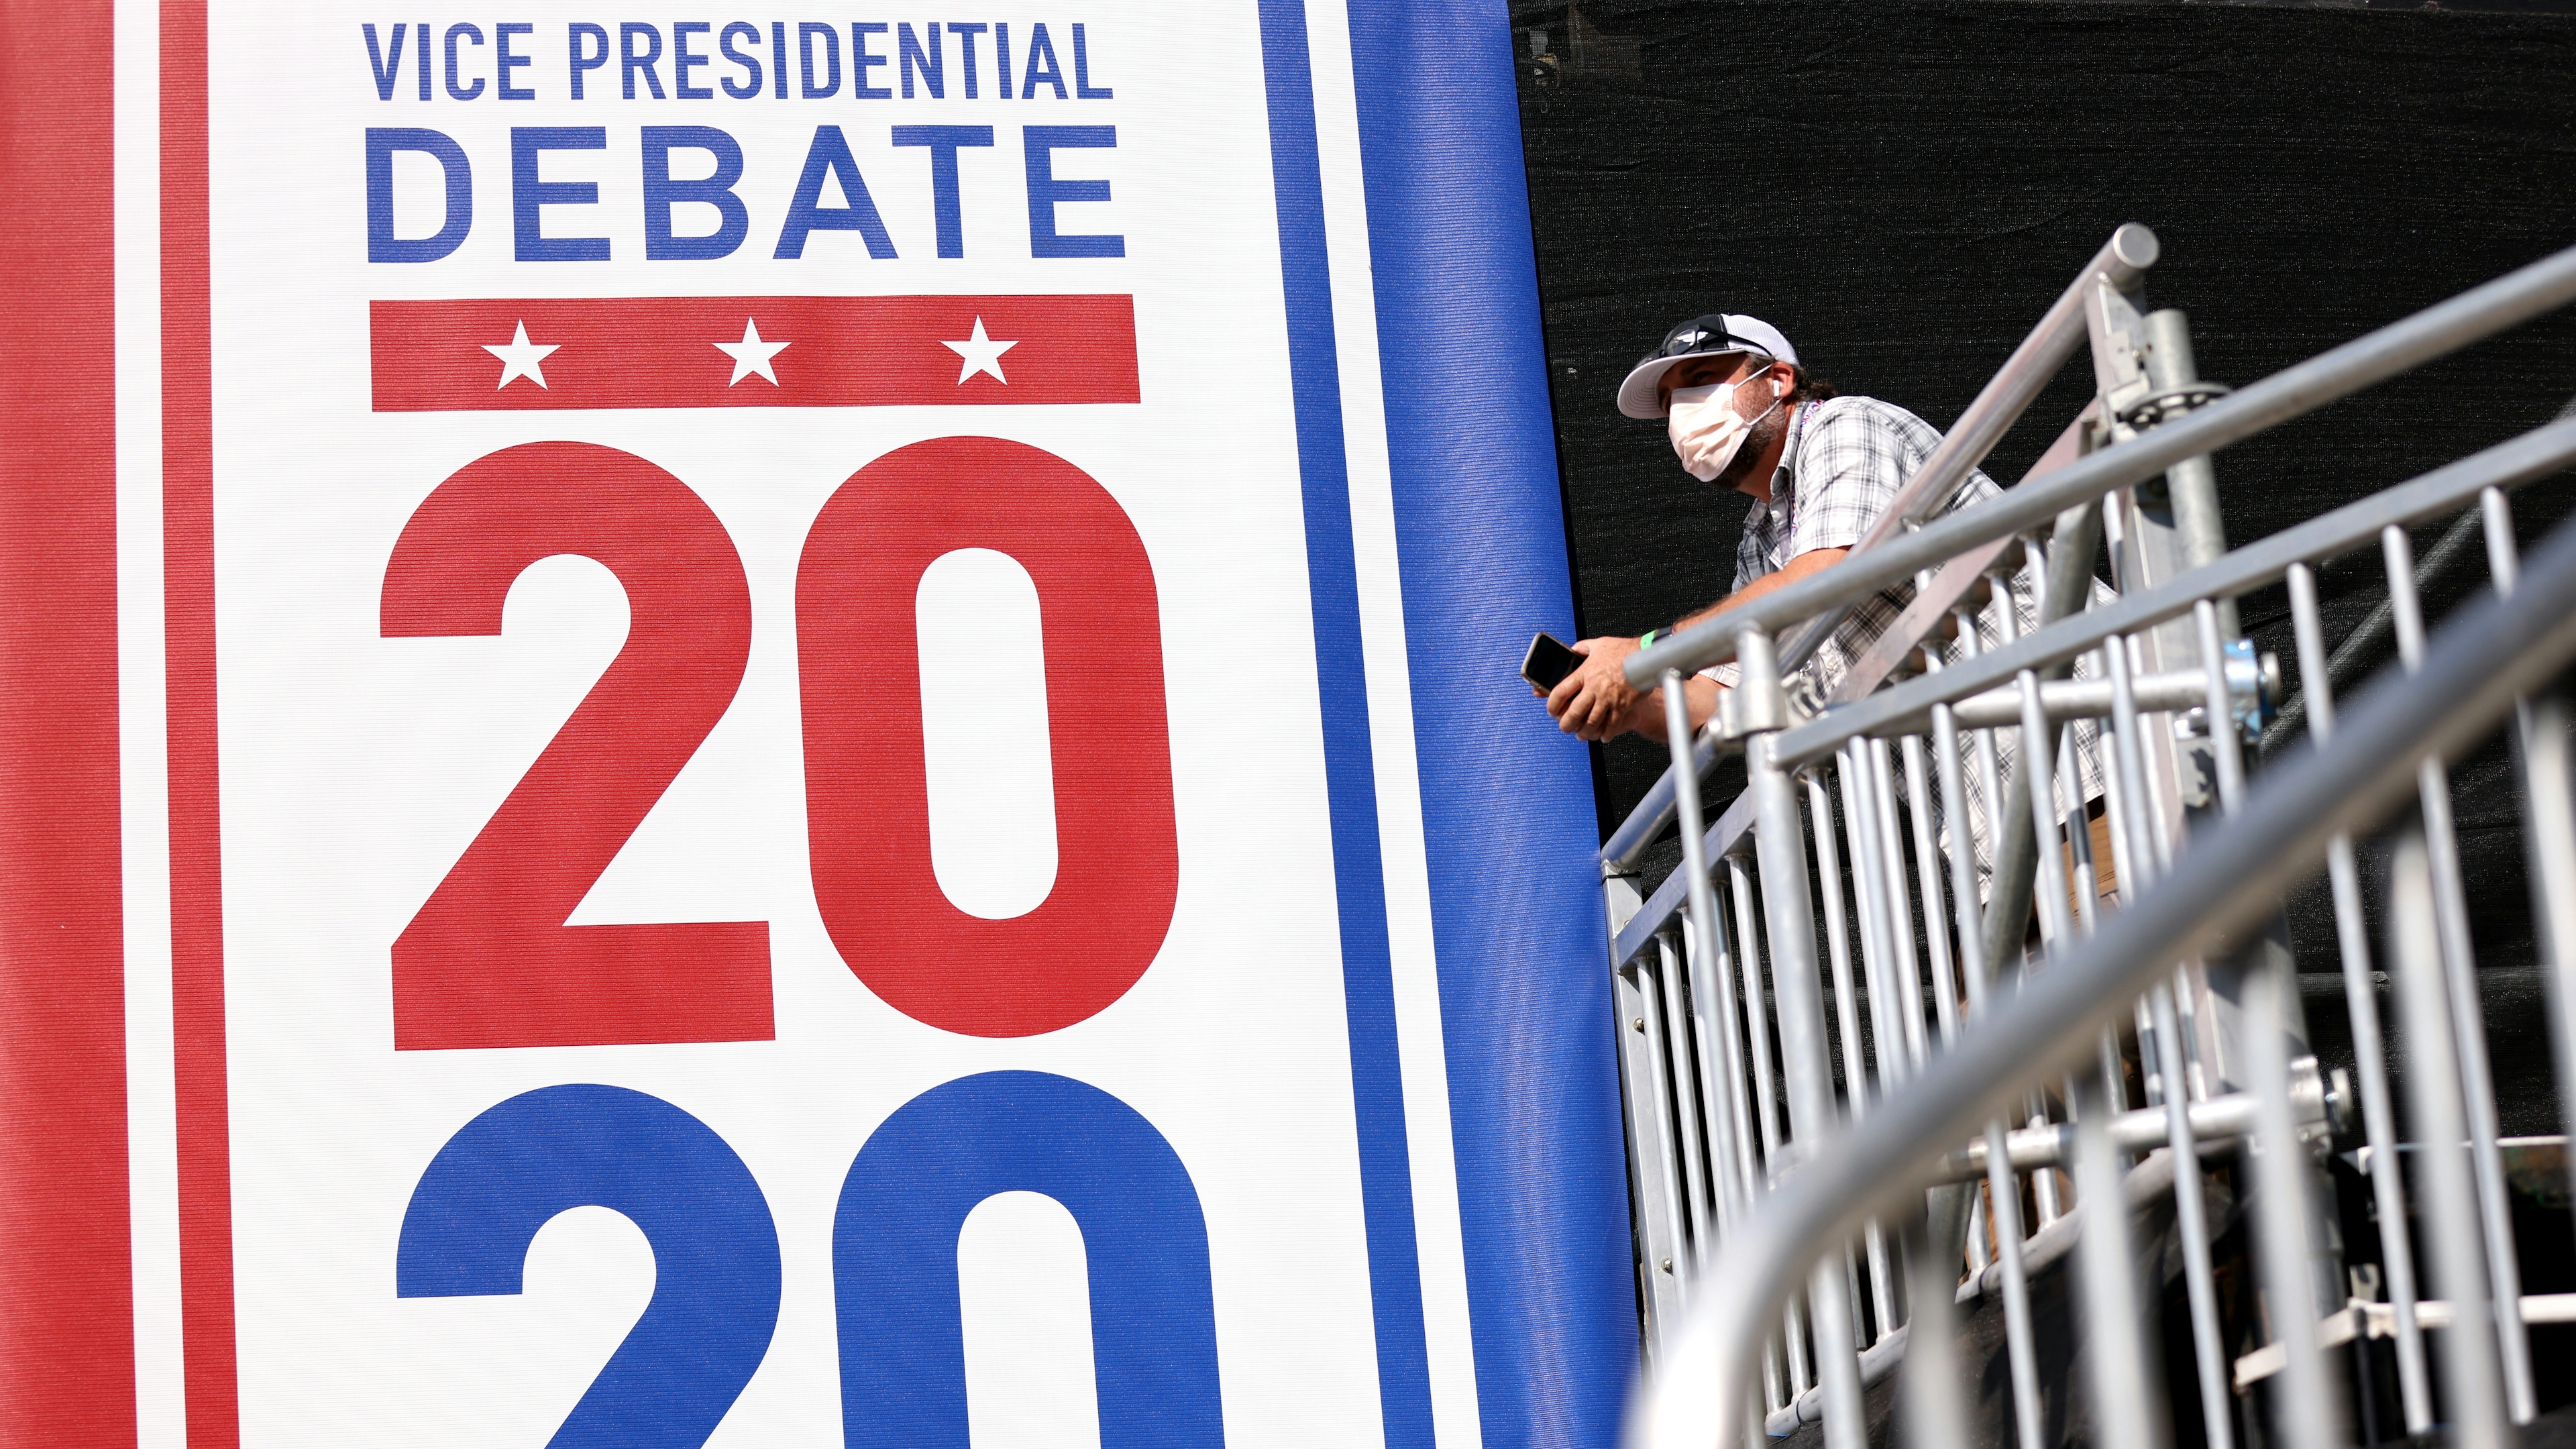 A worker stands next to a sign that reads "Vice Presidential Debate 2020" 